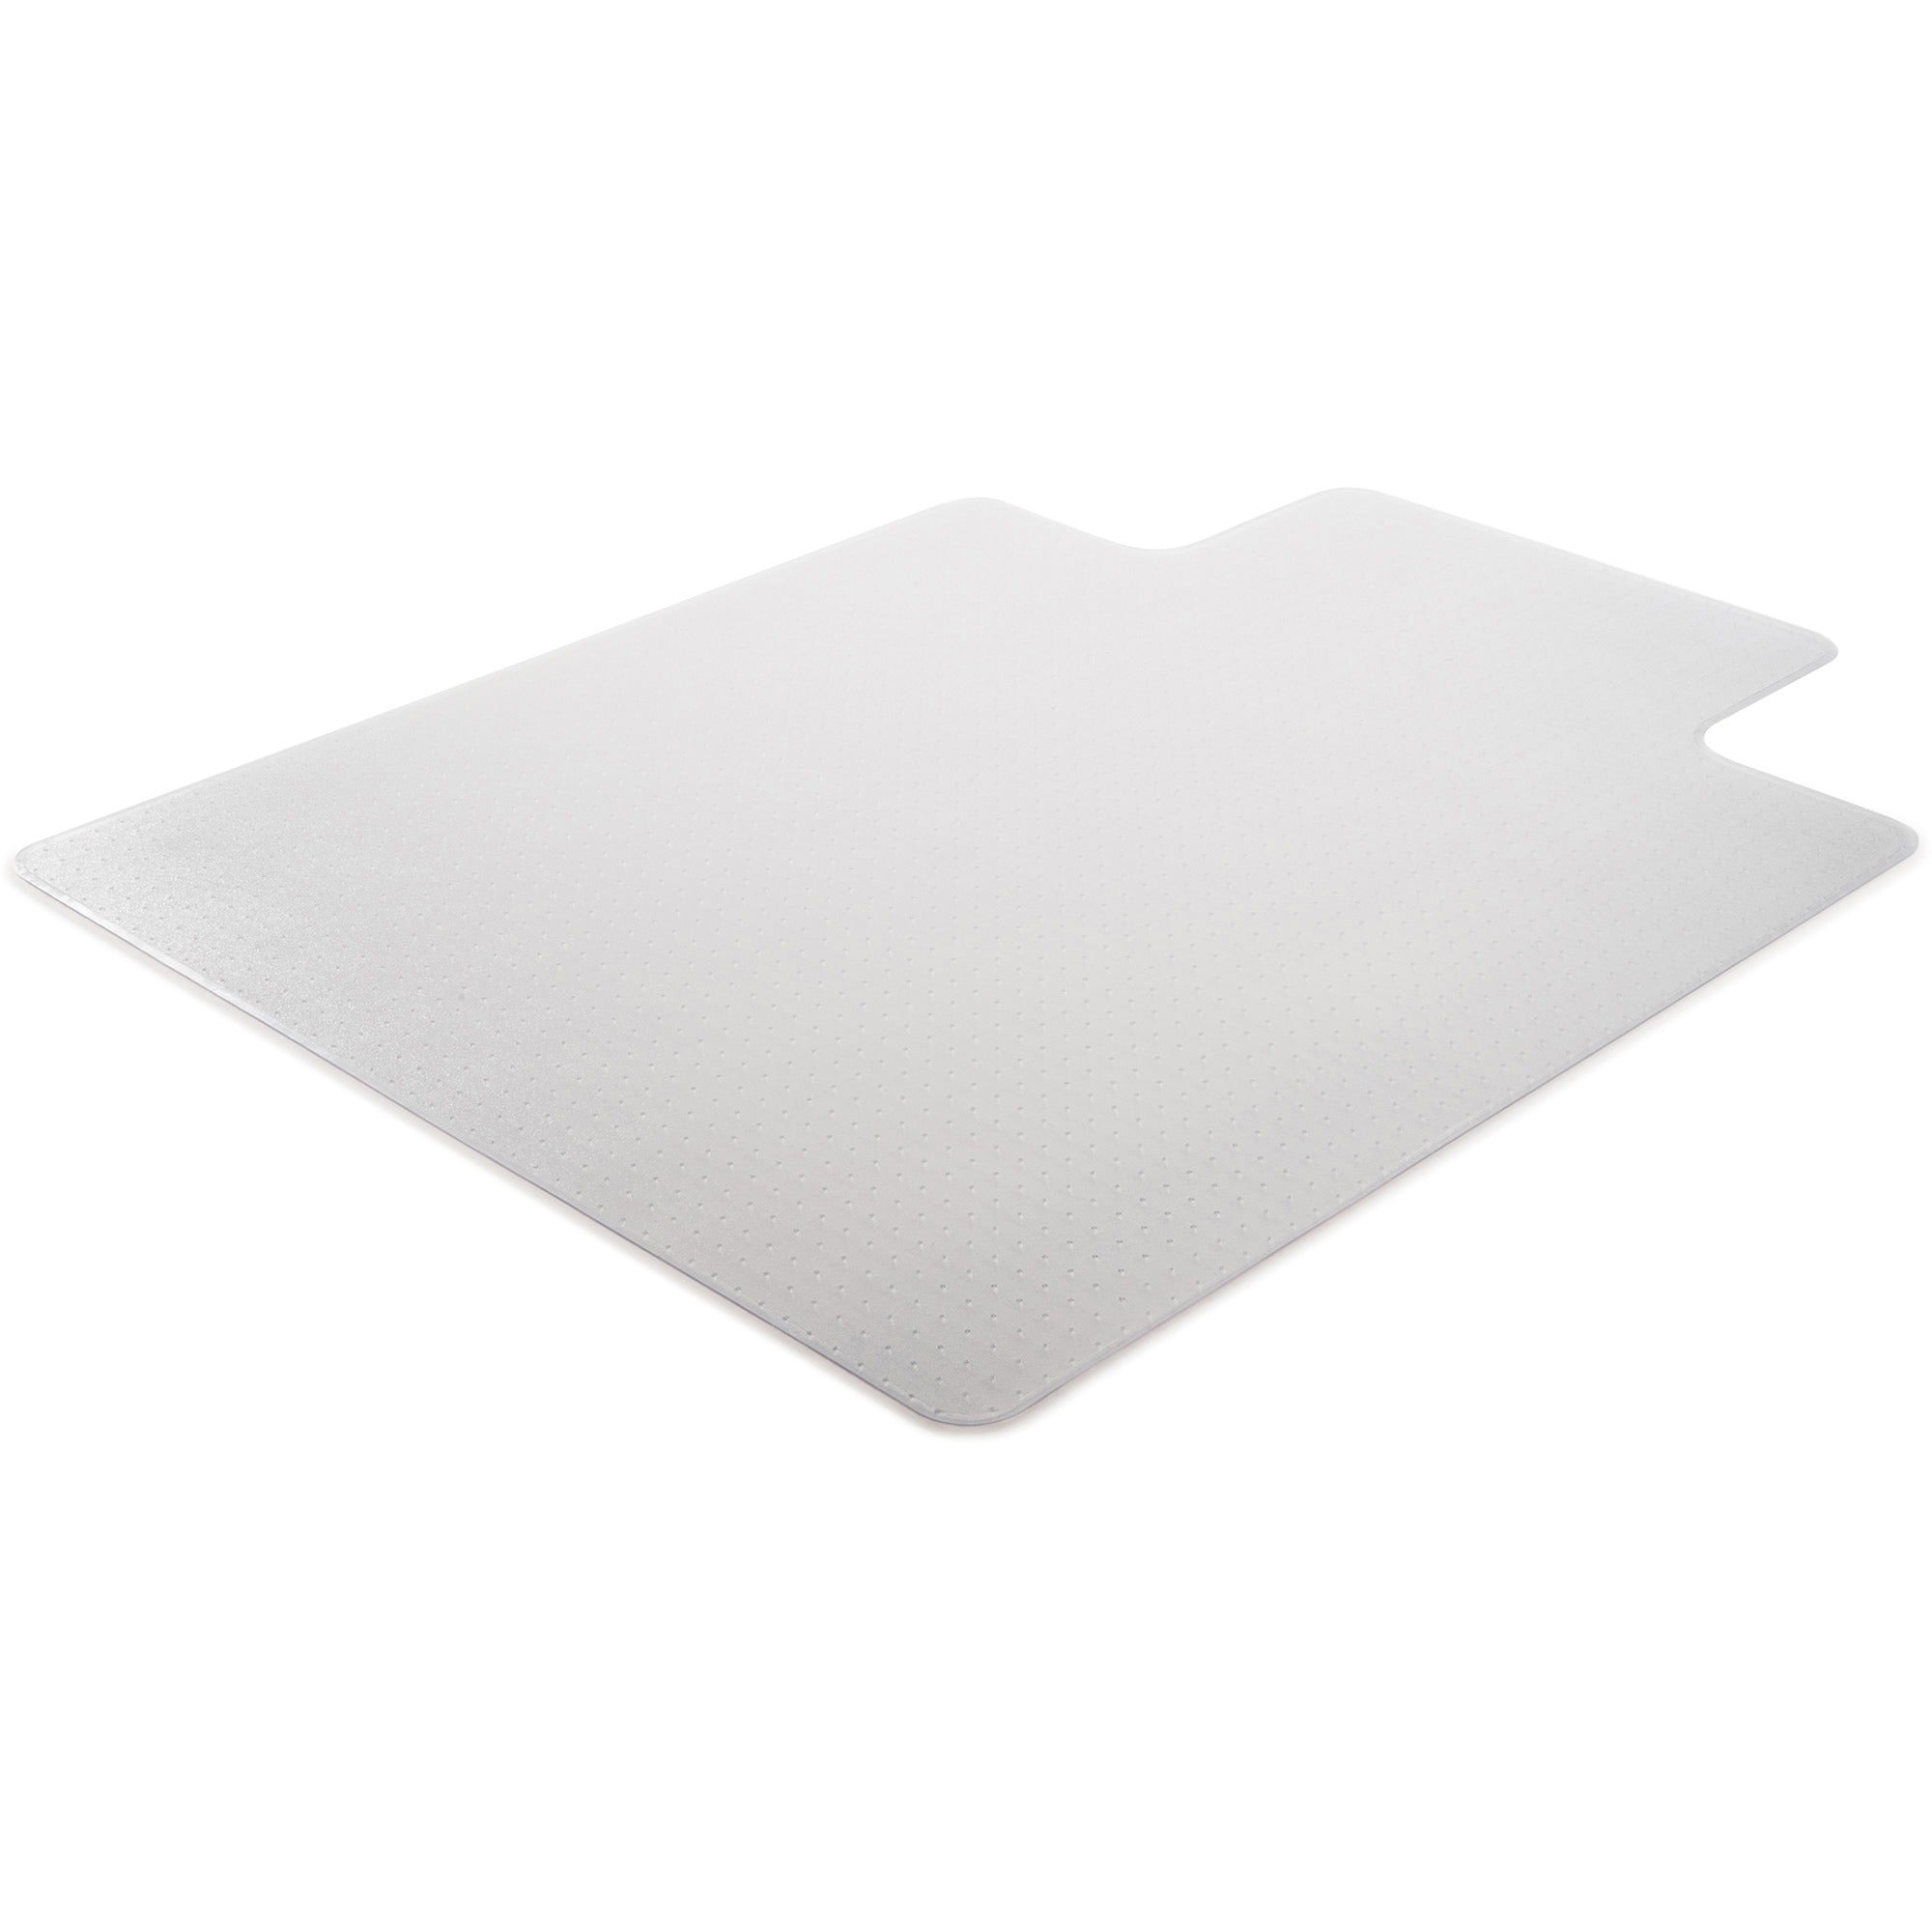 Lorell Low Pile Wide Lip Economy Chairmat - Carpeted Floor - 53" Length x 45" Width x 0.095" Thickness - Lip Size 12" Length x 25" Width - Vinyl - Clear - 1Each - 